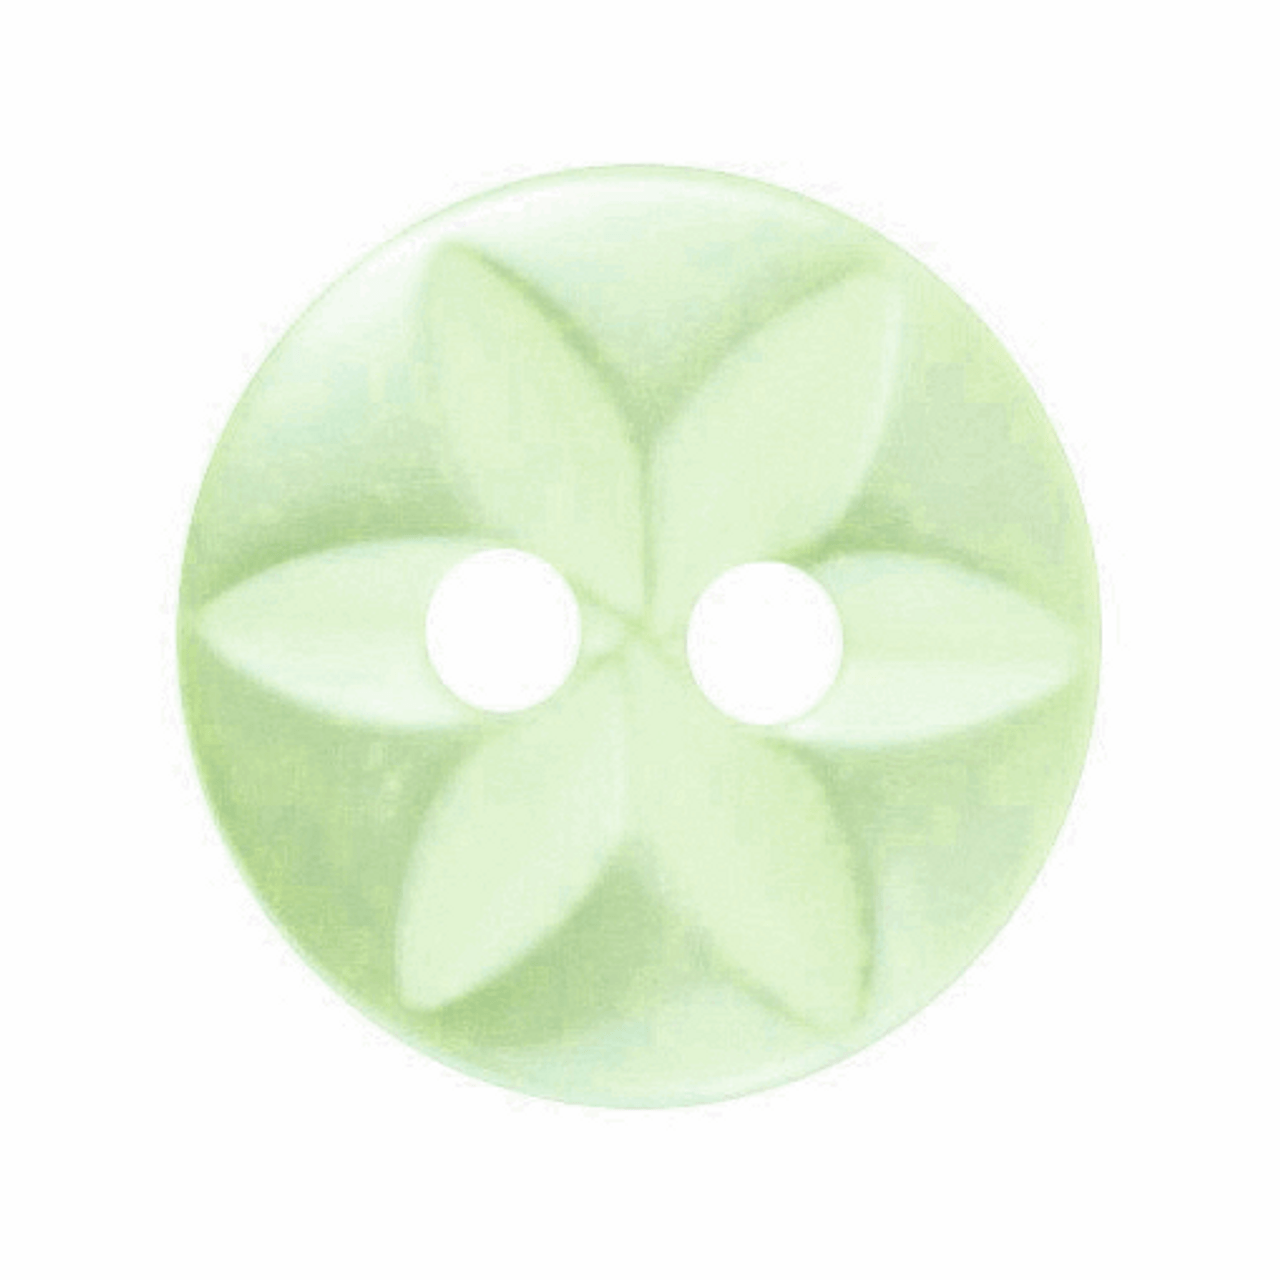 Pale Lime Star Button, 11mm (7/16in) Diameter (Sold Individually)